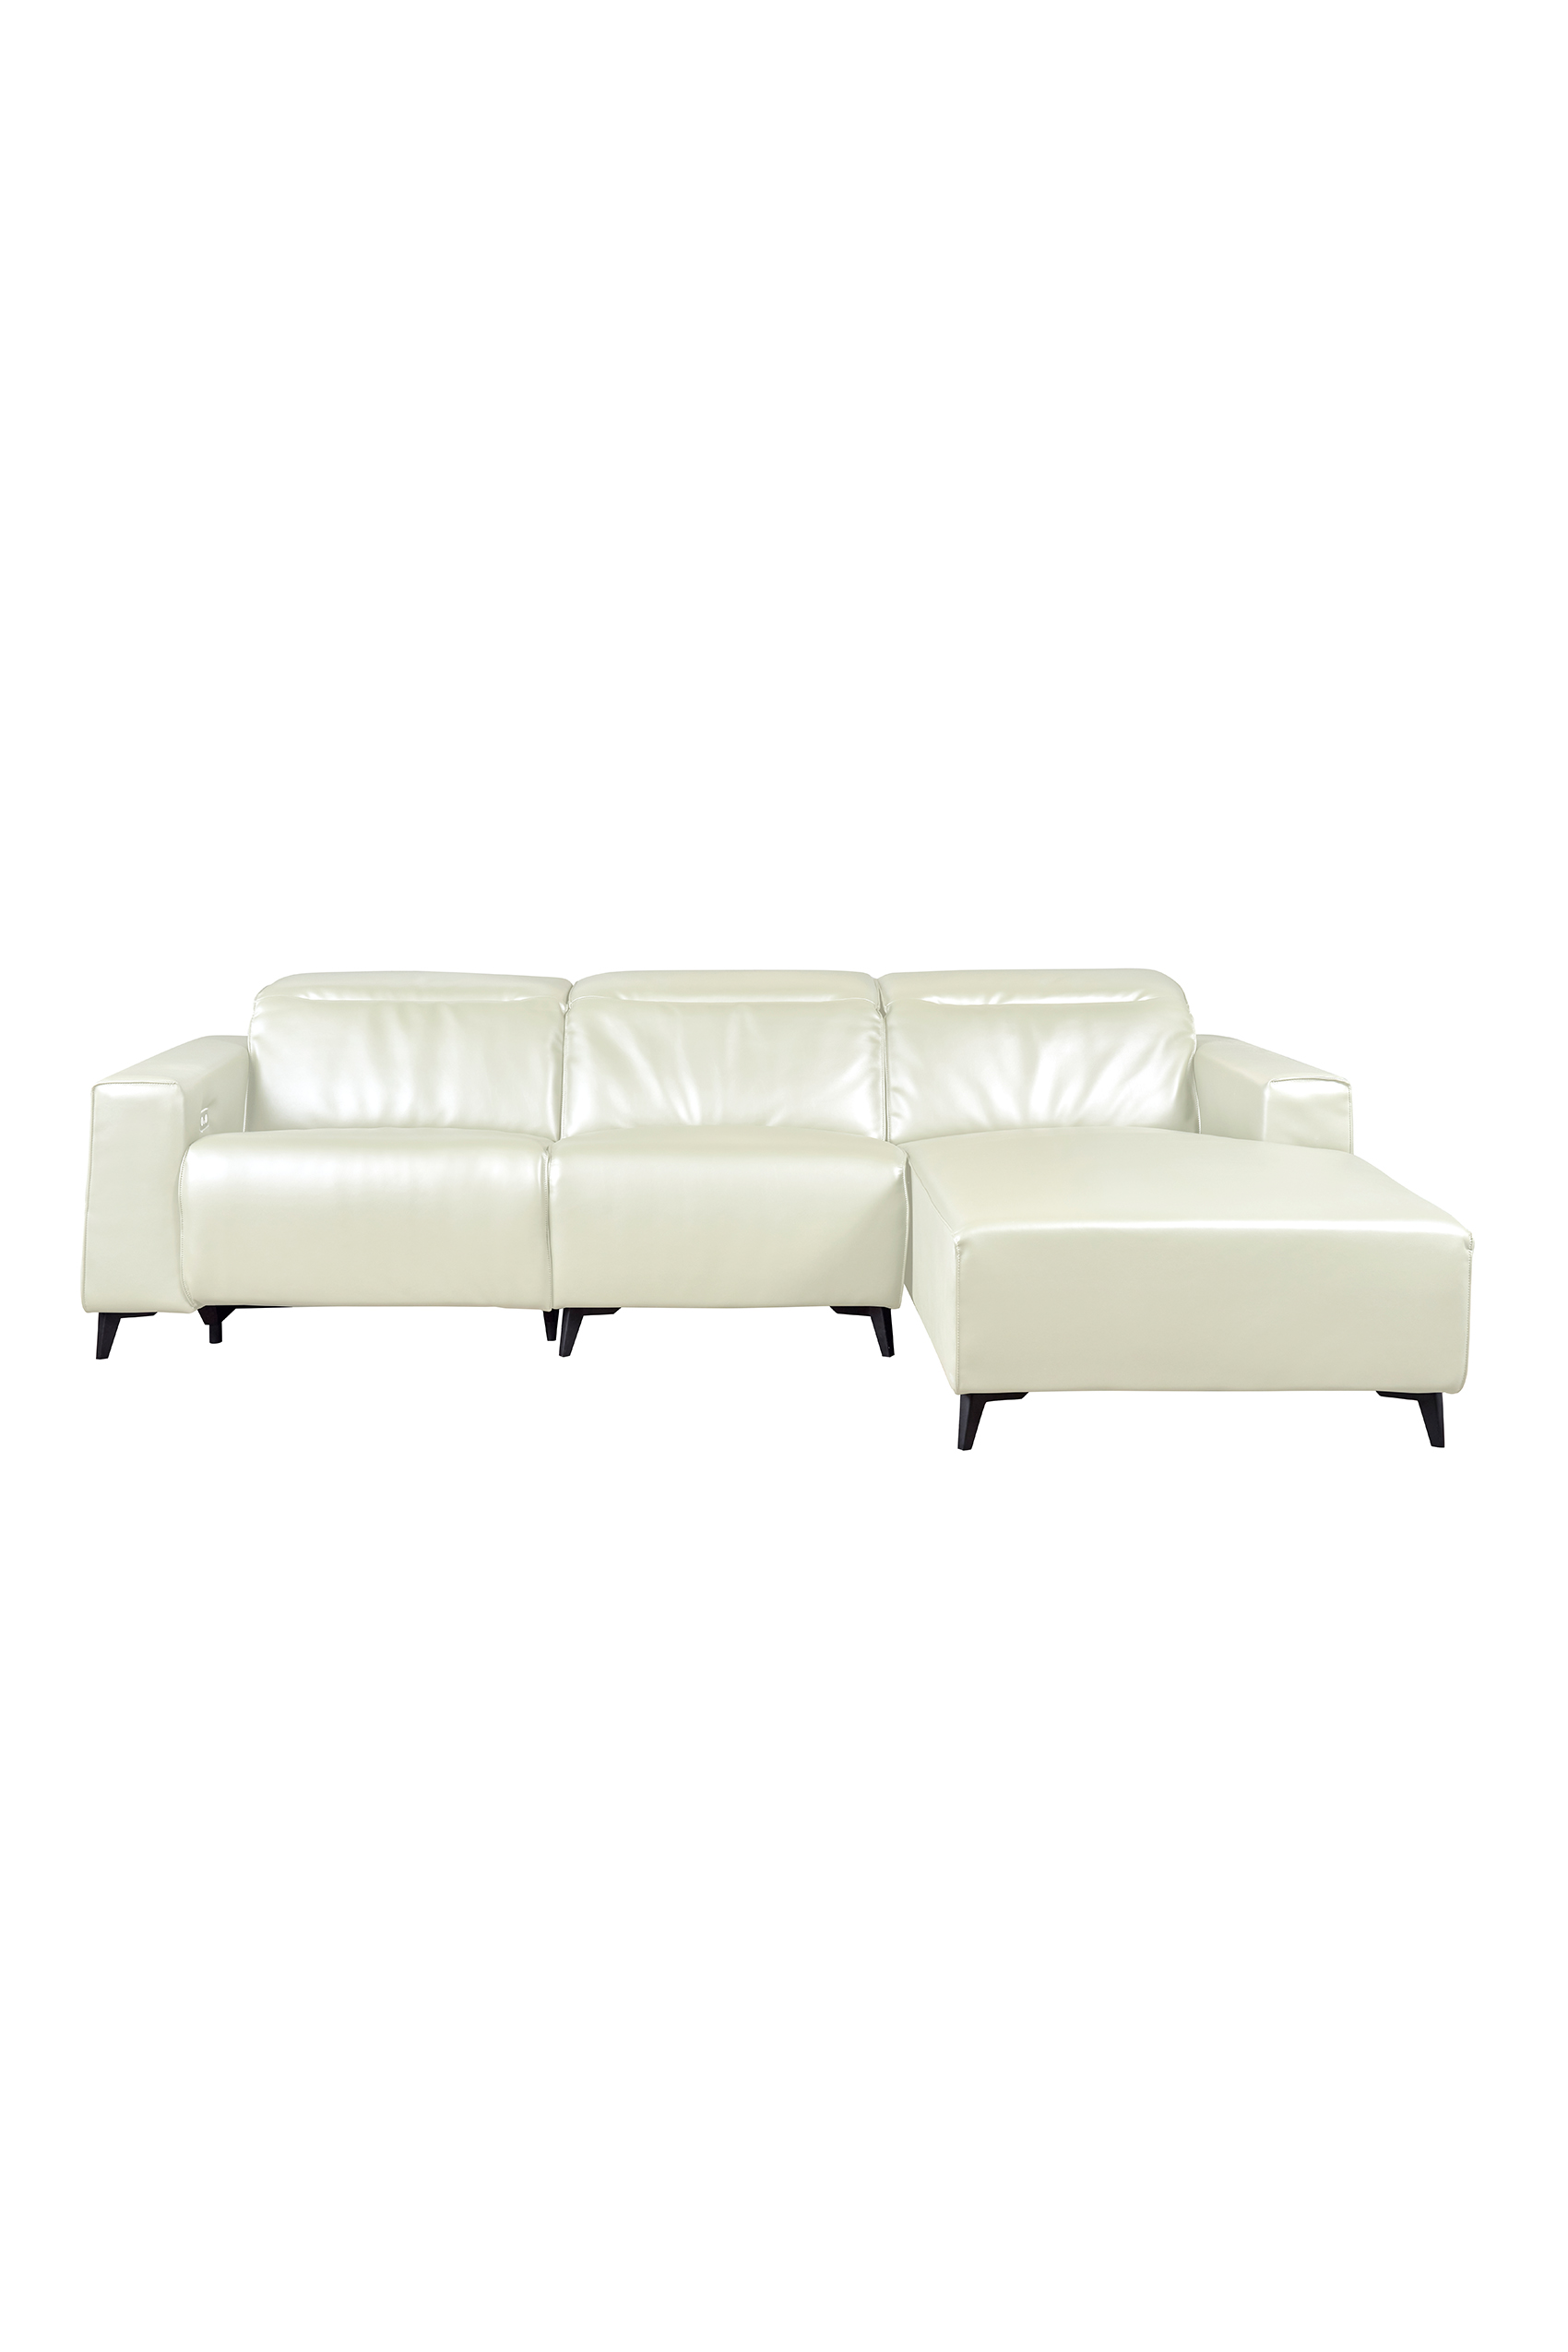 Terzigno L-Shape Leather Sofa with Recliner